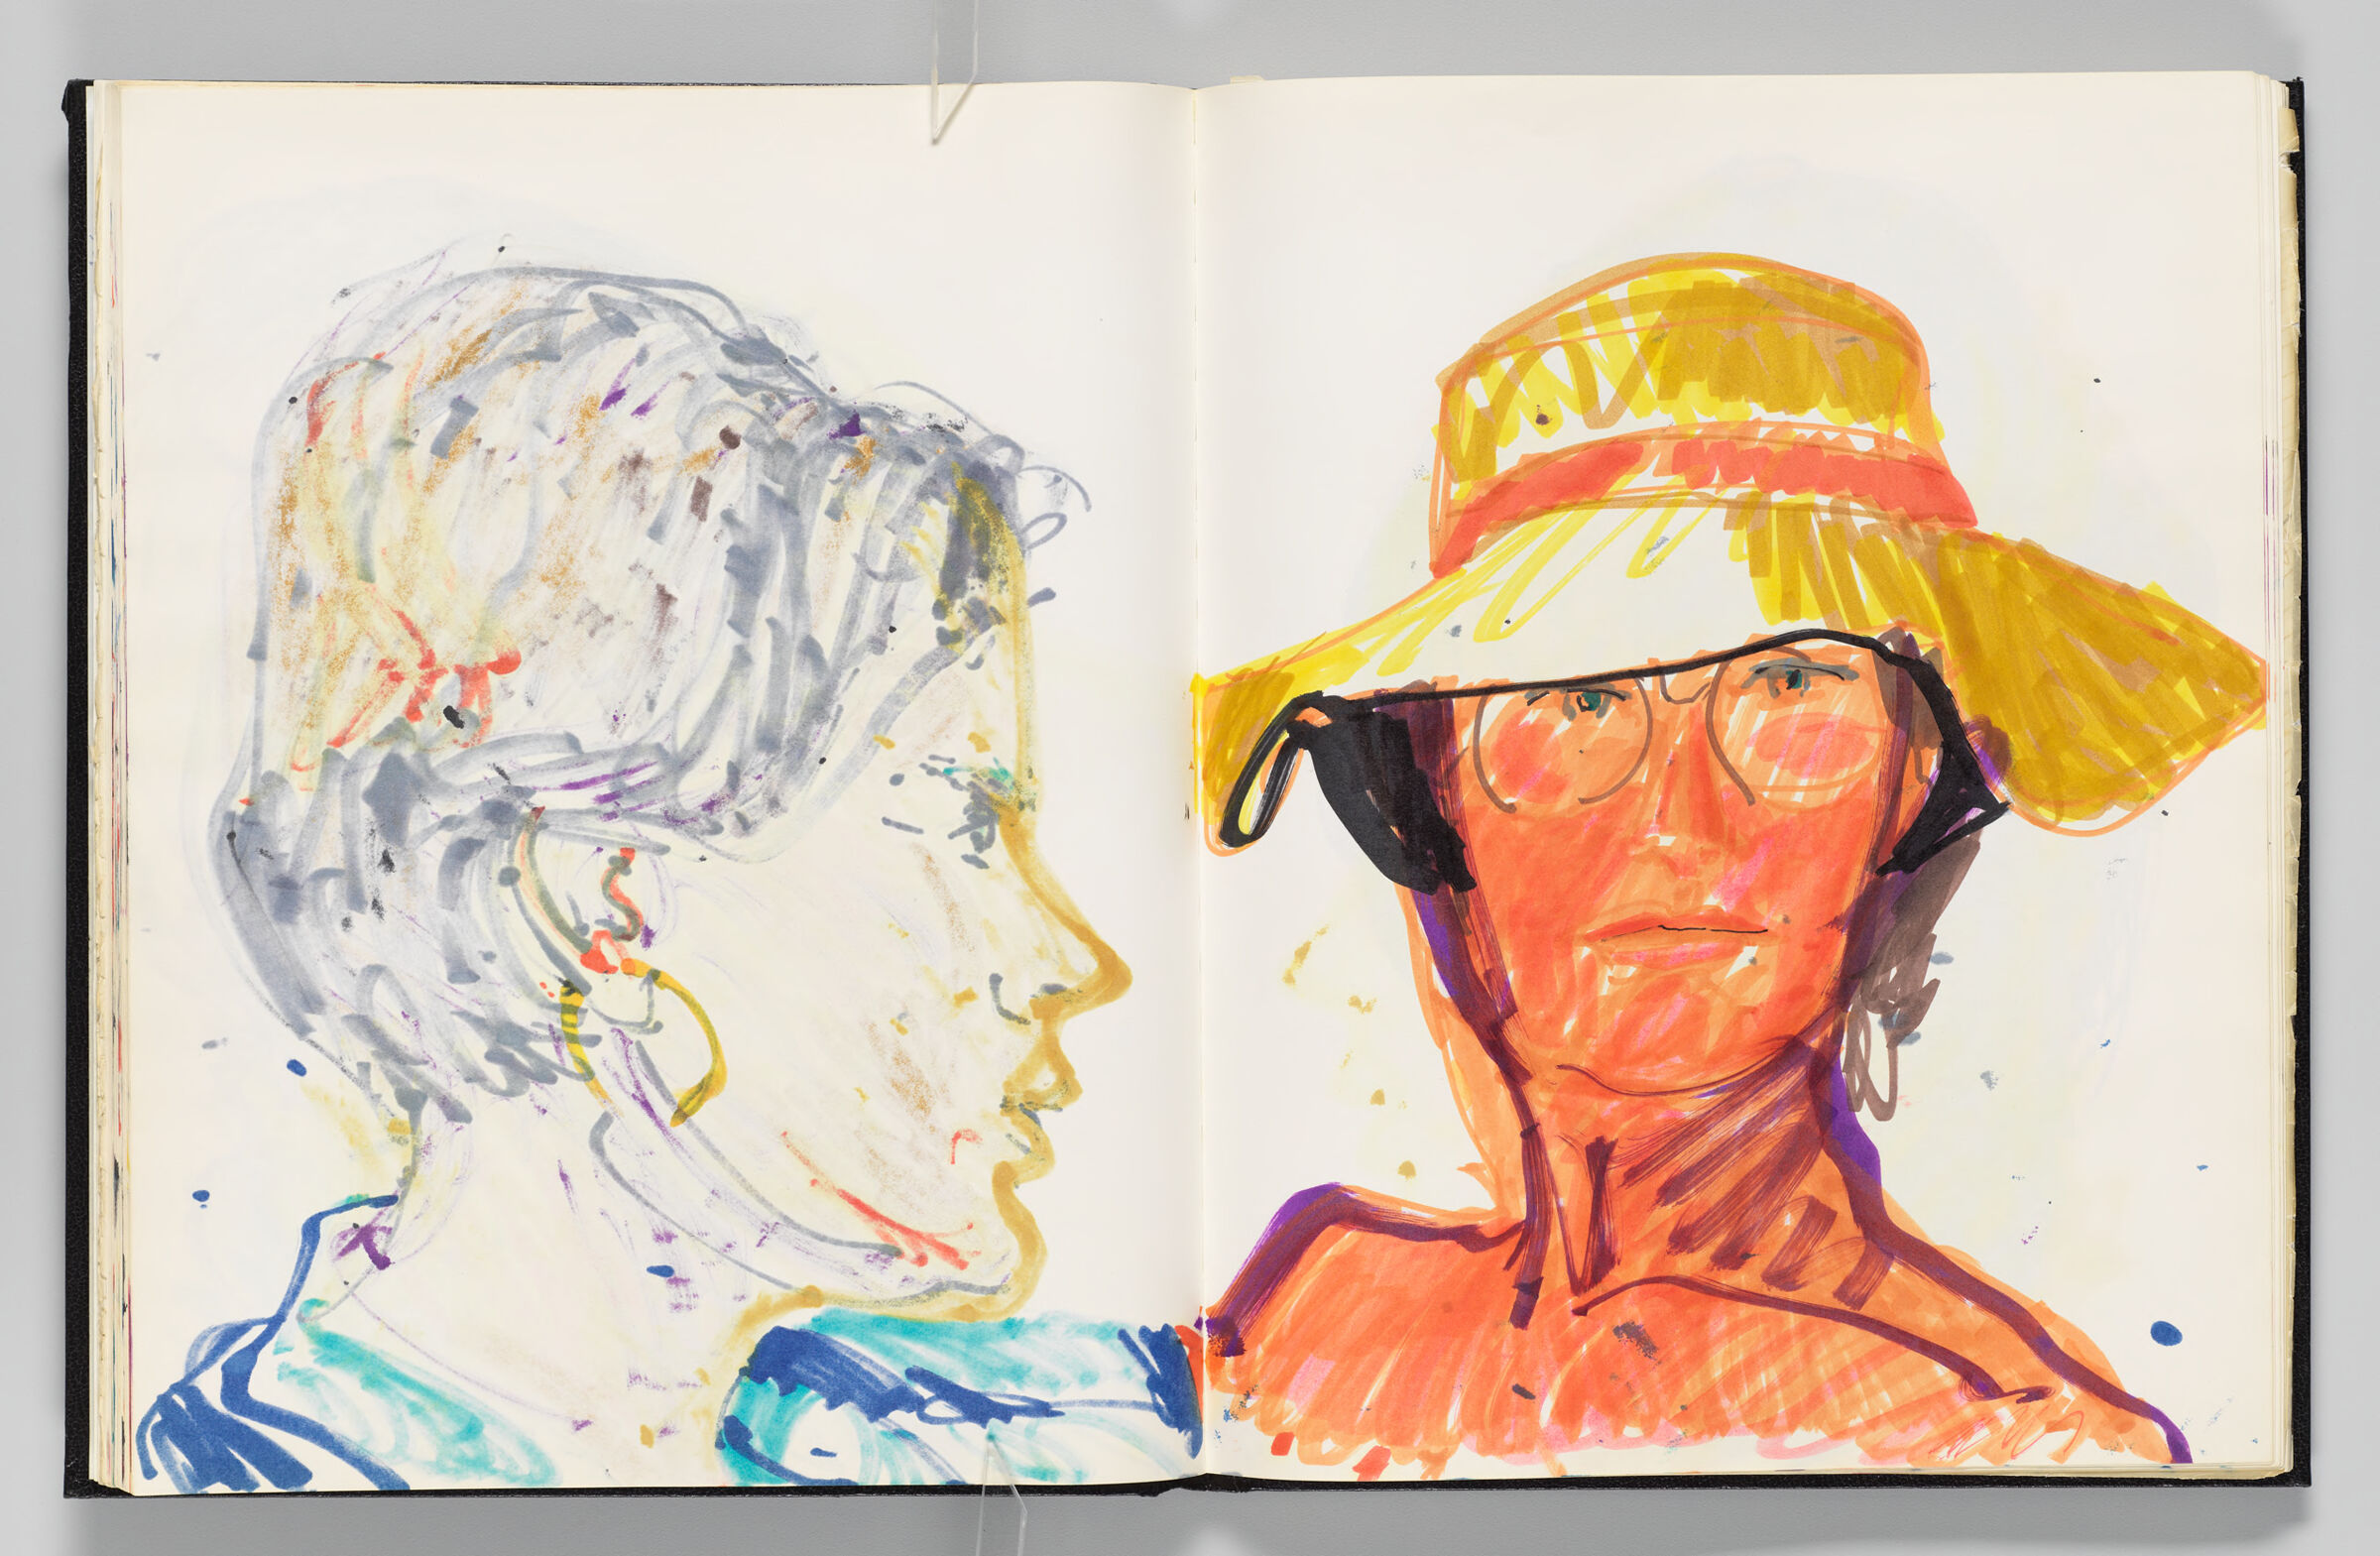 Untitled (Bleed-Through Of Previous Page, Left Page); Untitled (Female Figure In Sun Hat And Glasses [Elizabeth], Right Page)